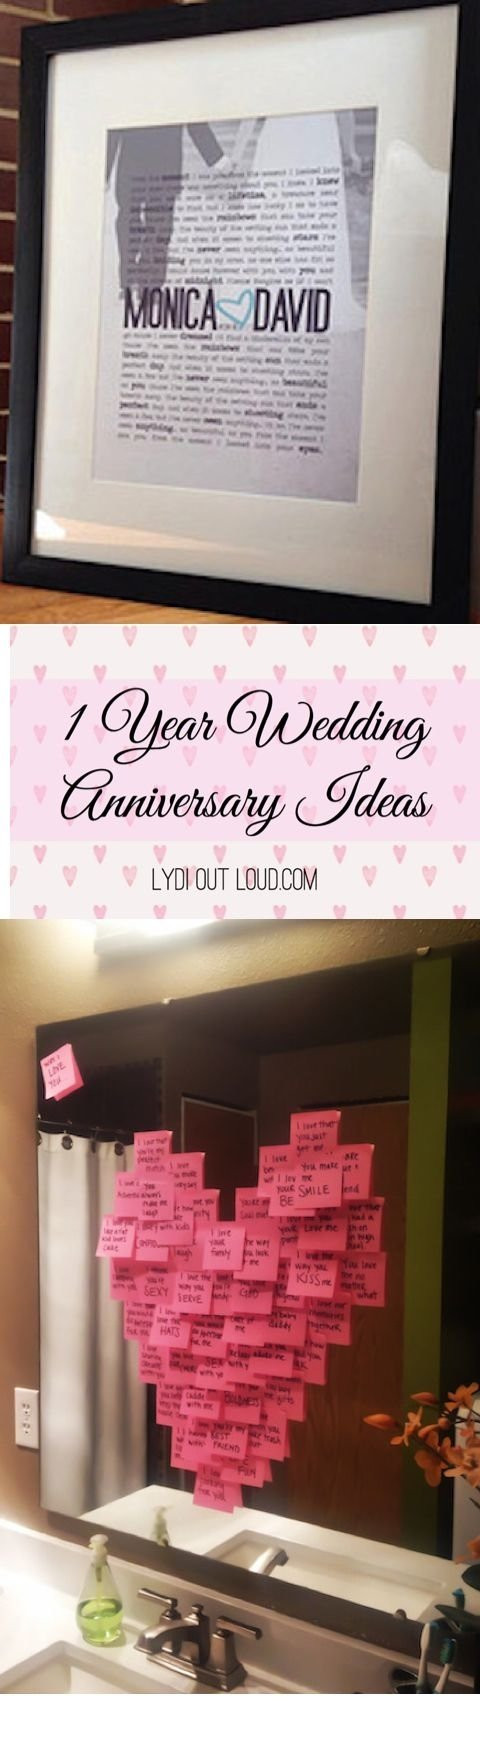 2 Year Wedding Anniversary Gifts For Him
 10 Lovable 2 Year Anniversary Gift Ideas For Him 2020